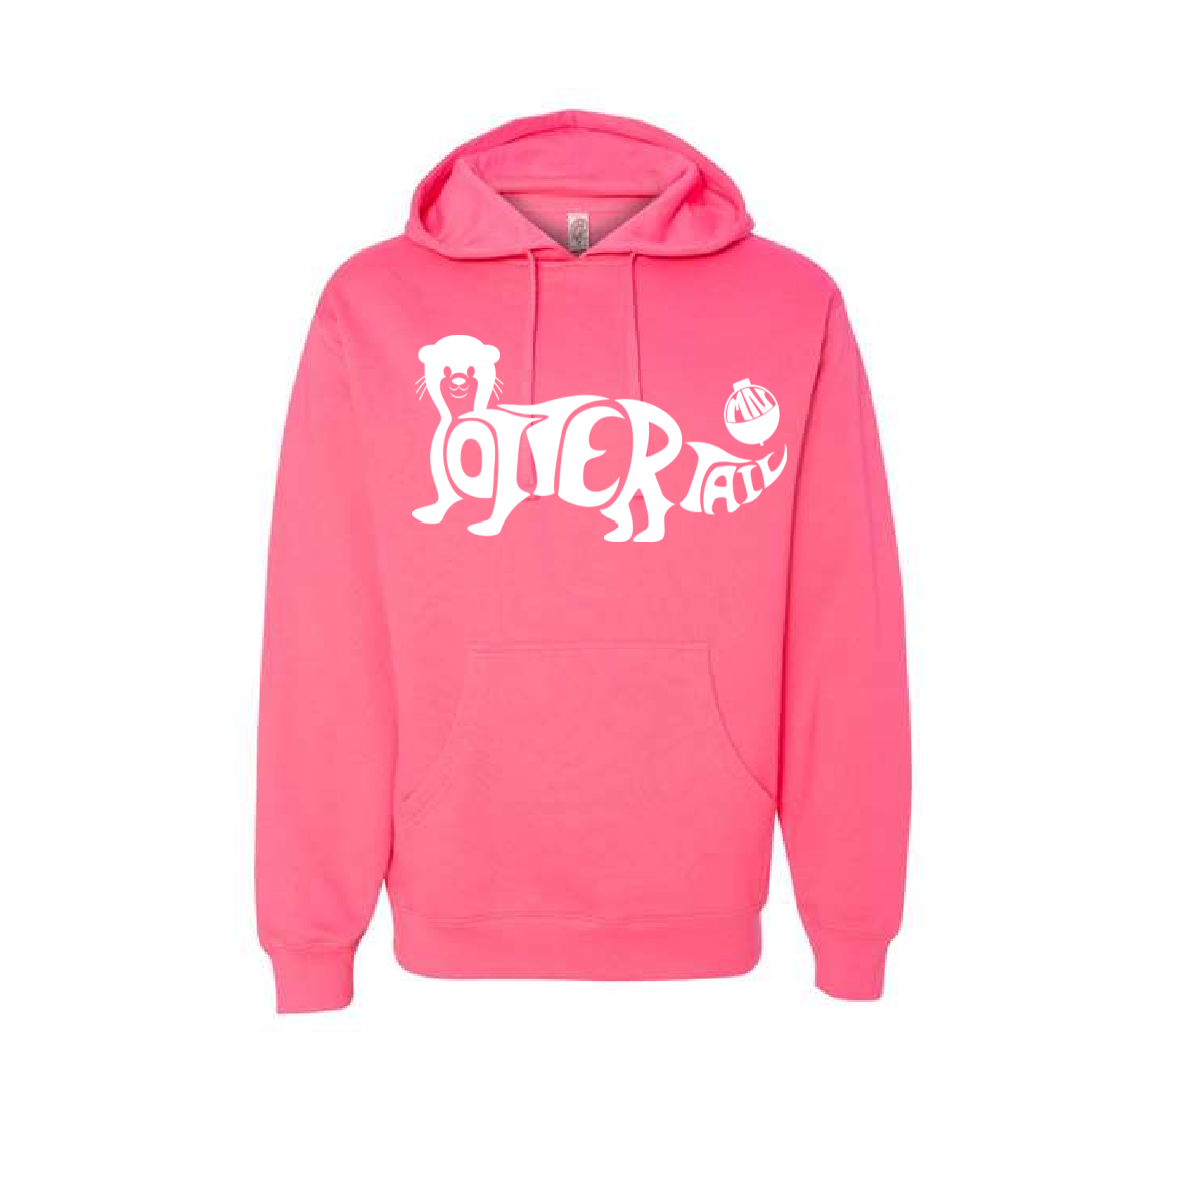 Bobber the Otter Hoodie-Hot Pink